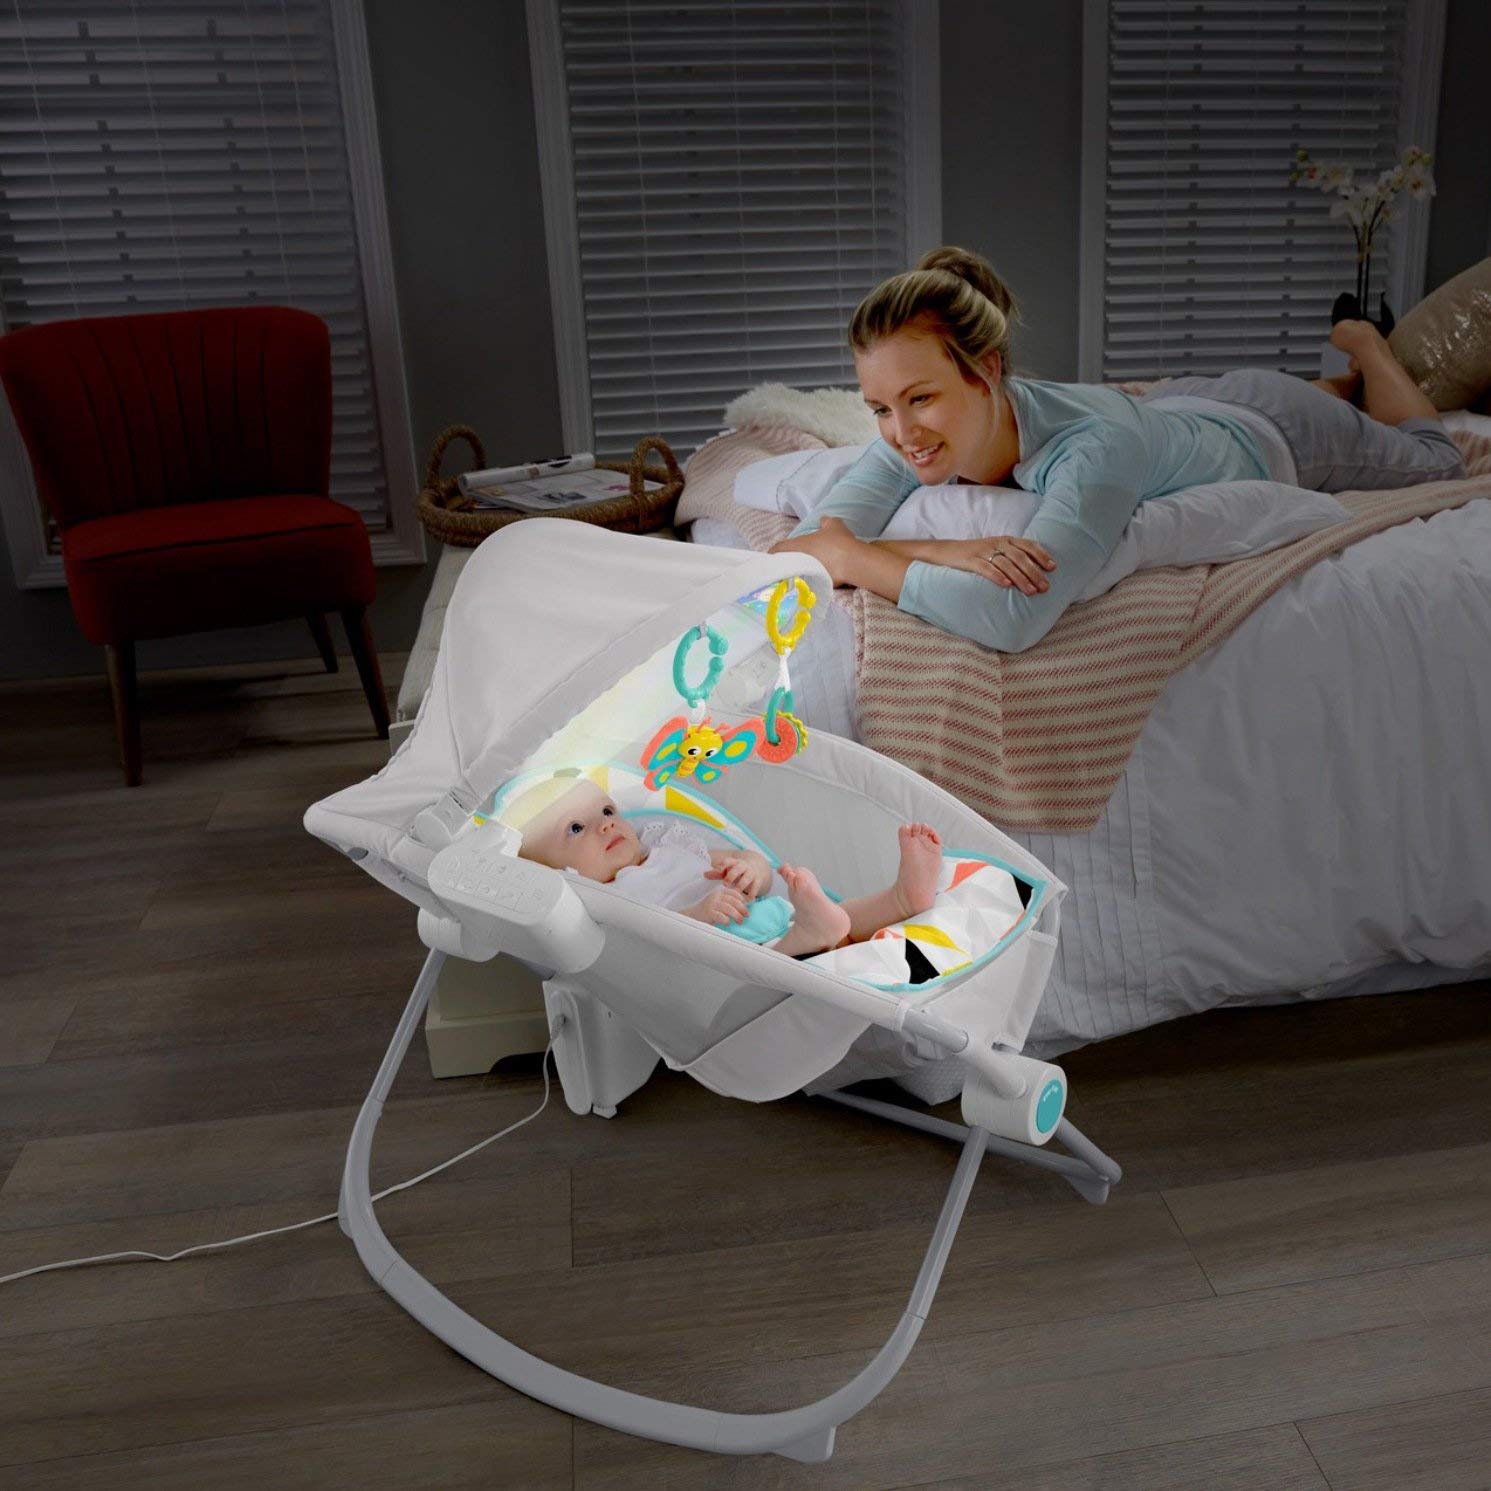 Fisher Price Premium Auto Rock N Play Sleeper With Just The Right Angle Keeps Babyhead Elevated For A Better Milk Digestion And Sleep 